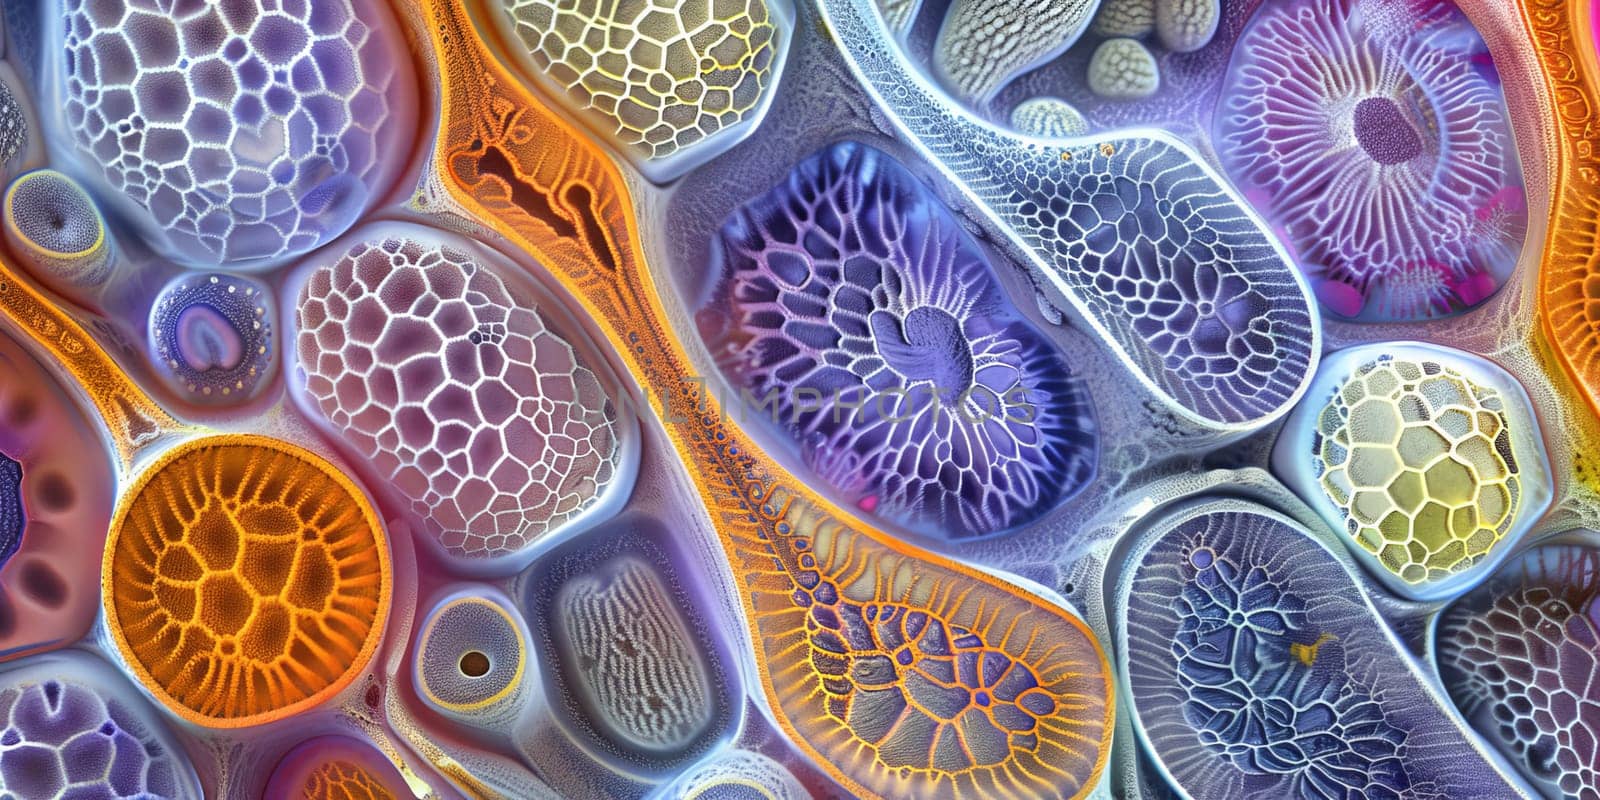 Detail of structures such as pollen grains, leaf veins, or a plant cells by Kadula